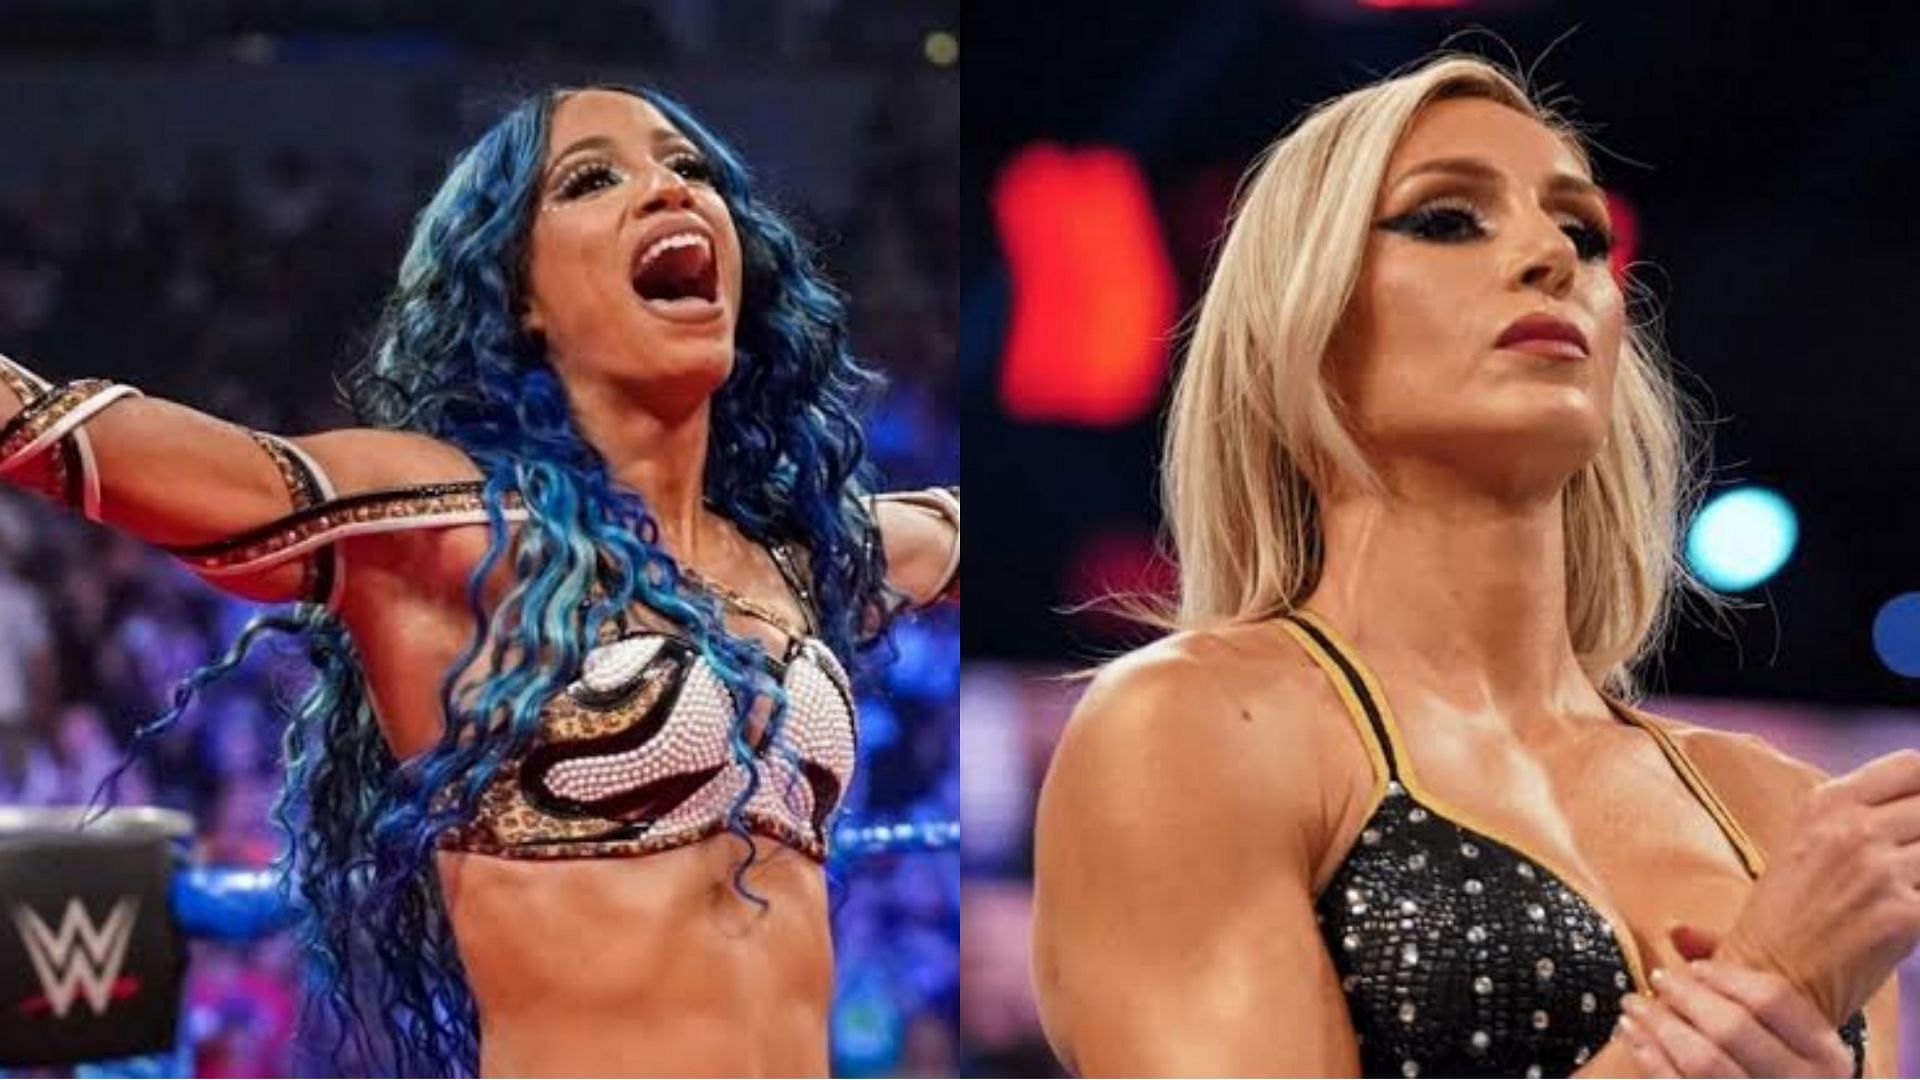 Sasha Banks sustained a serious leg injury at a recent live event in a match against Charlotte Flair